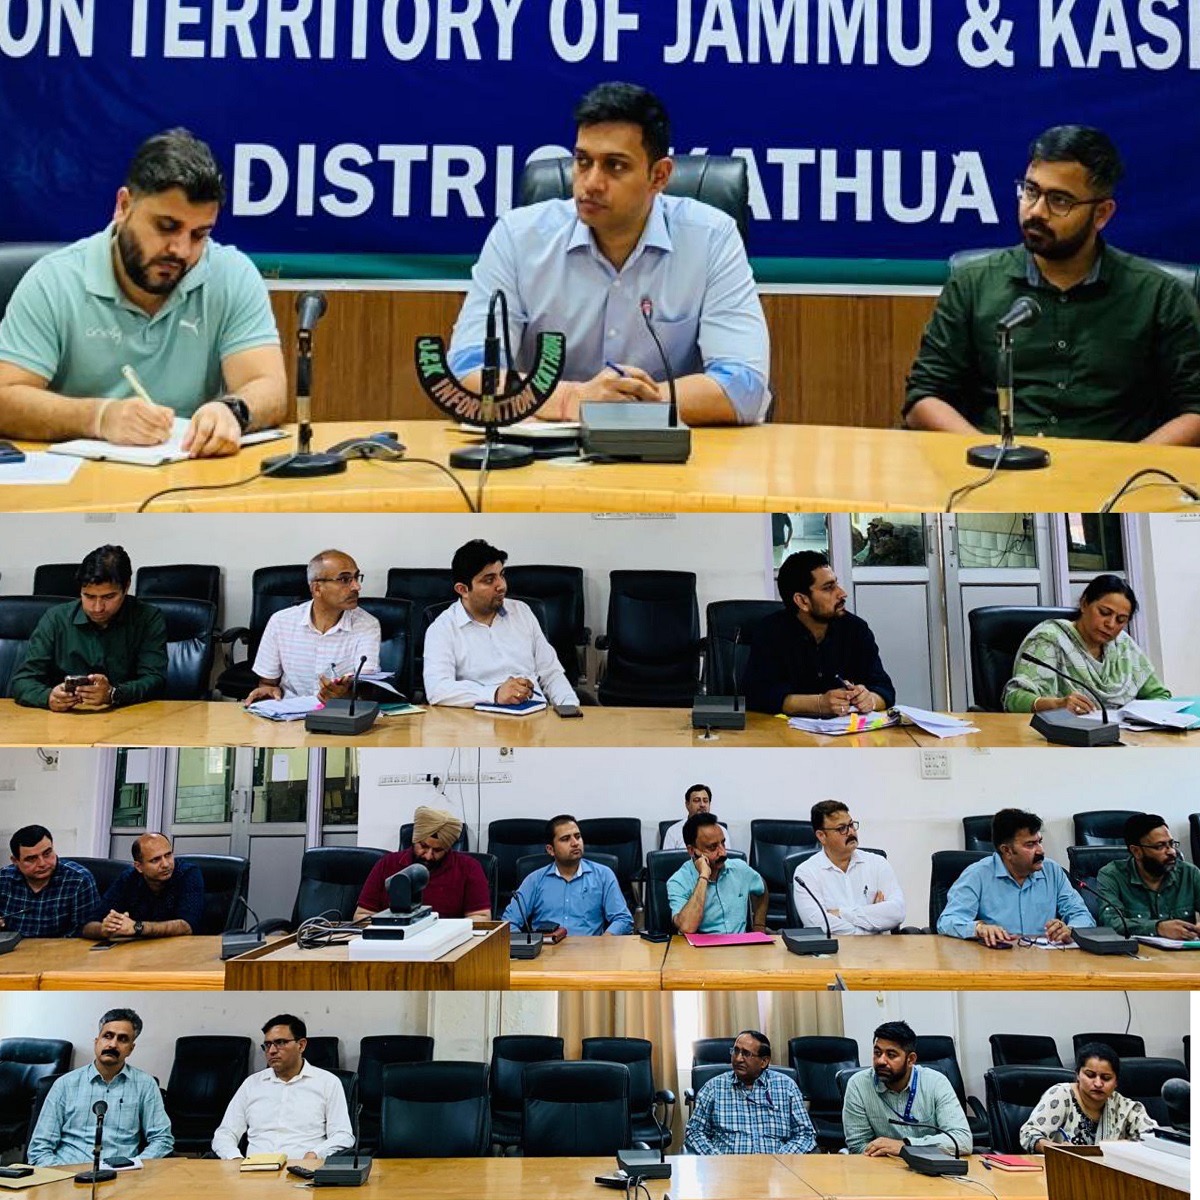 'DC Kathua issues directions over HADP'